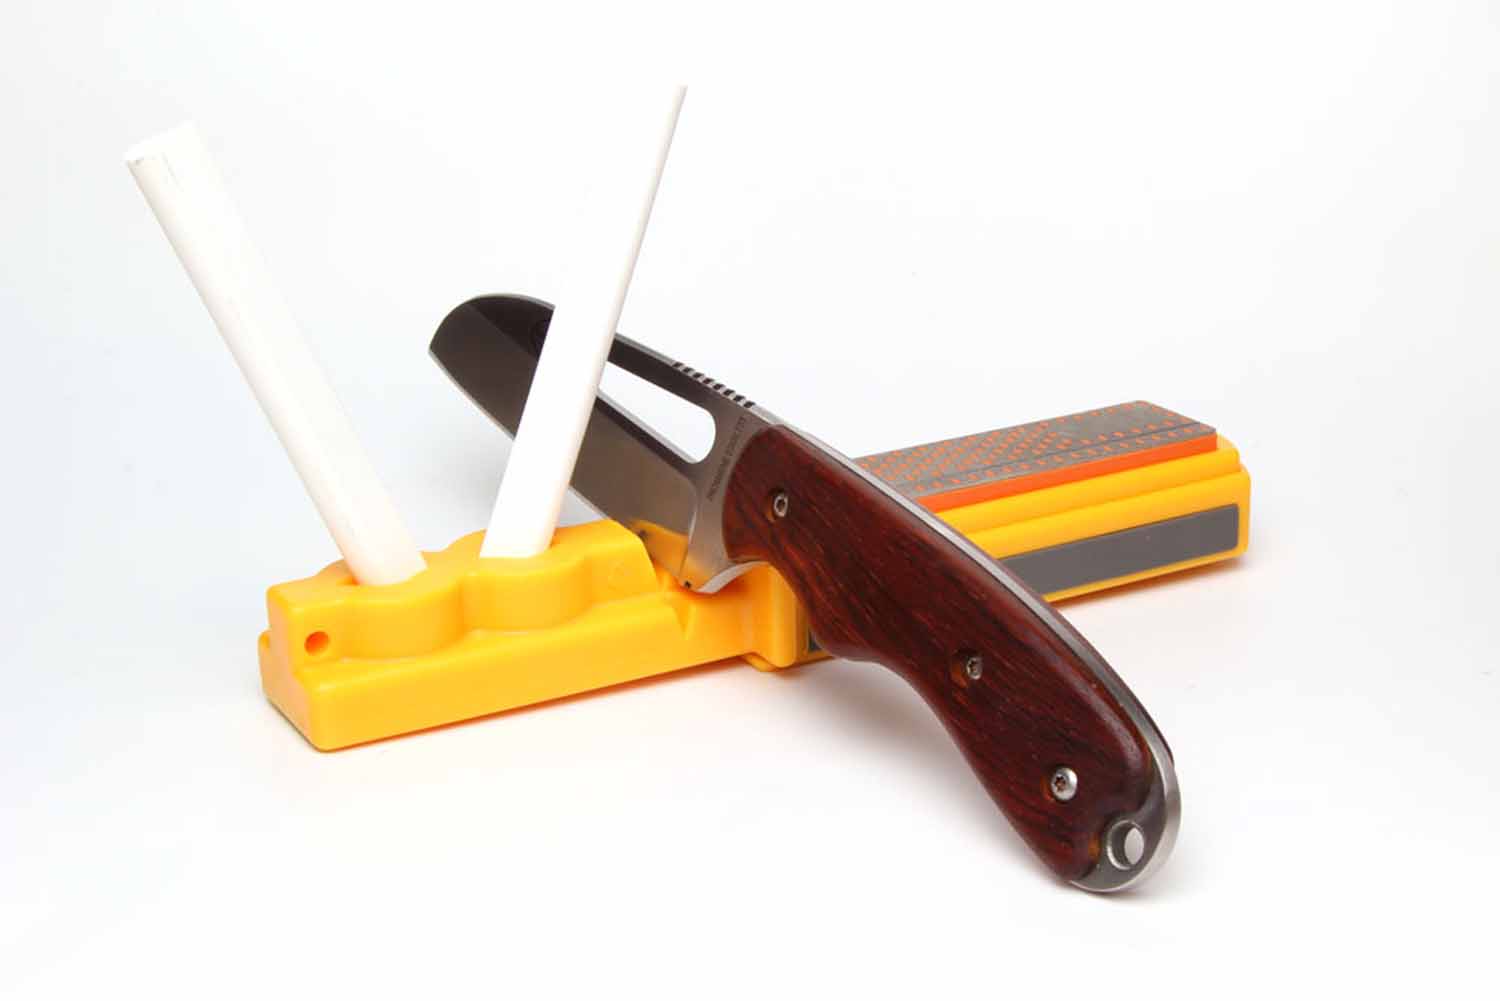 Smith's 3-in-1 Sharpening System